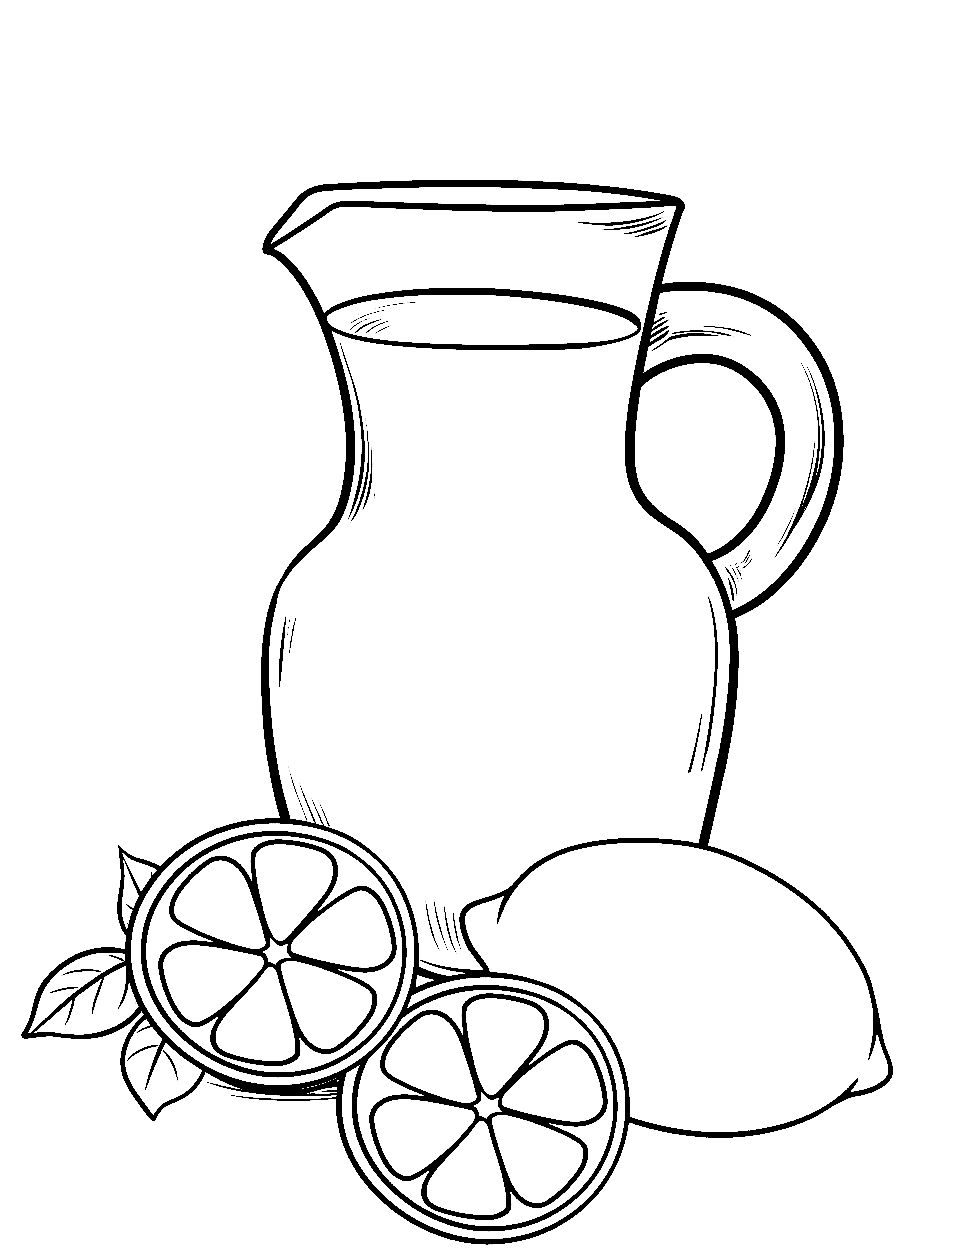 Lemonade Lounge Coloring Page - A pitcher of lemonade with its ingredients lying close.